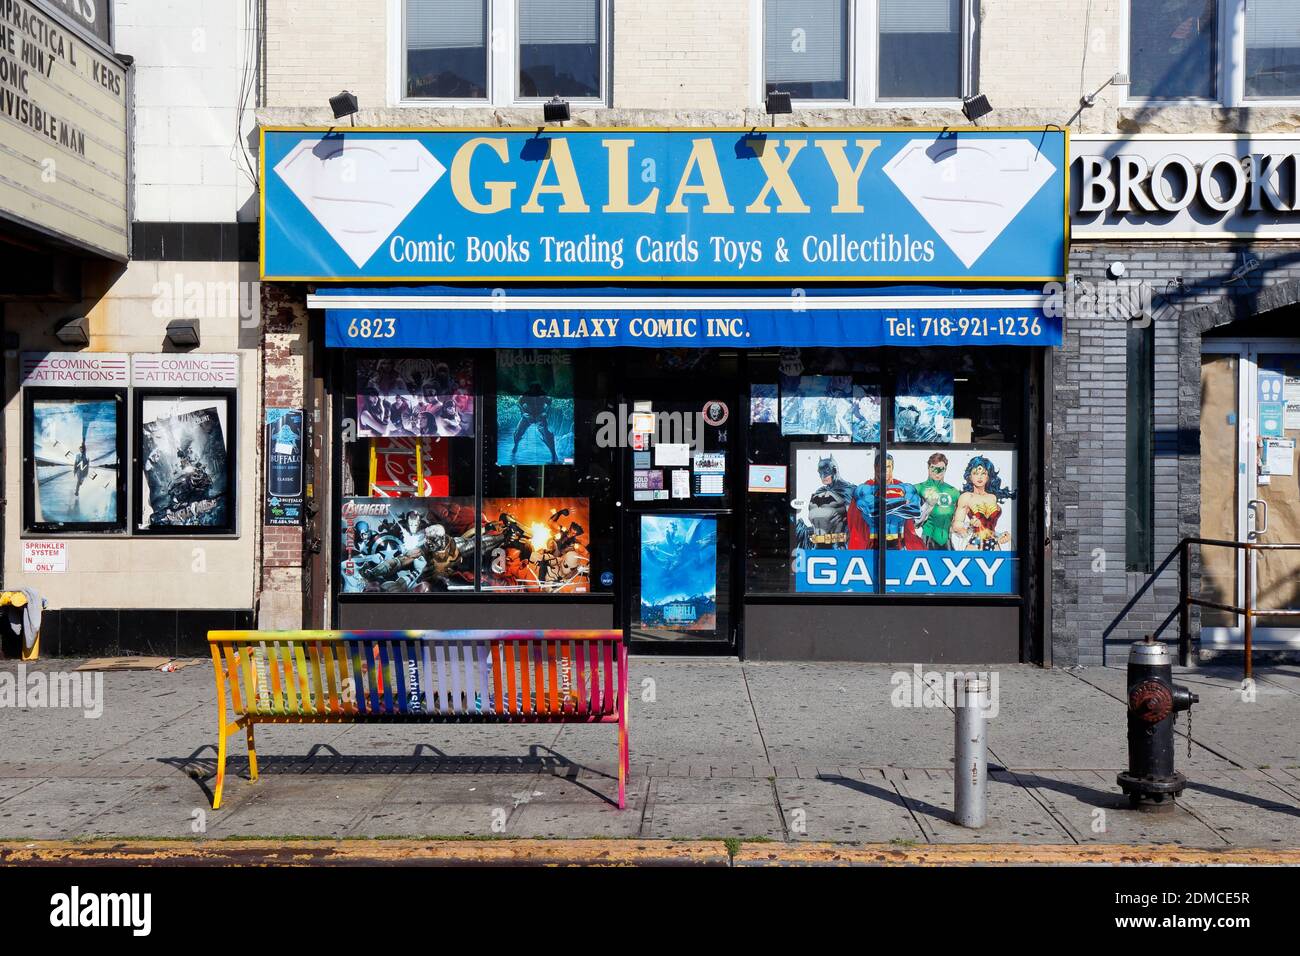 Galaxy Comics, 6823 5th Ave, Brooklyn, New York. NYC storefront photo of a comics and collectibles shop in the Bay Ridge neighborhood. Stock Photo